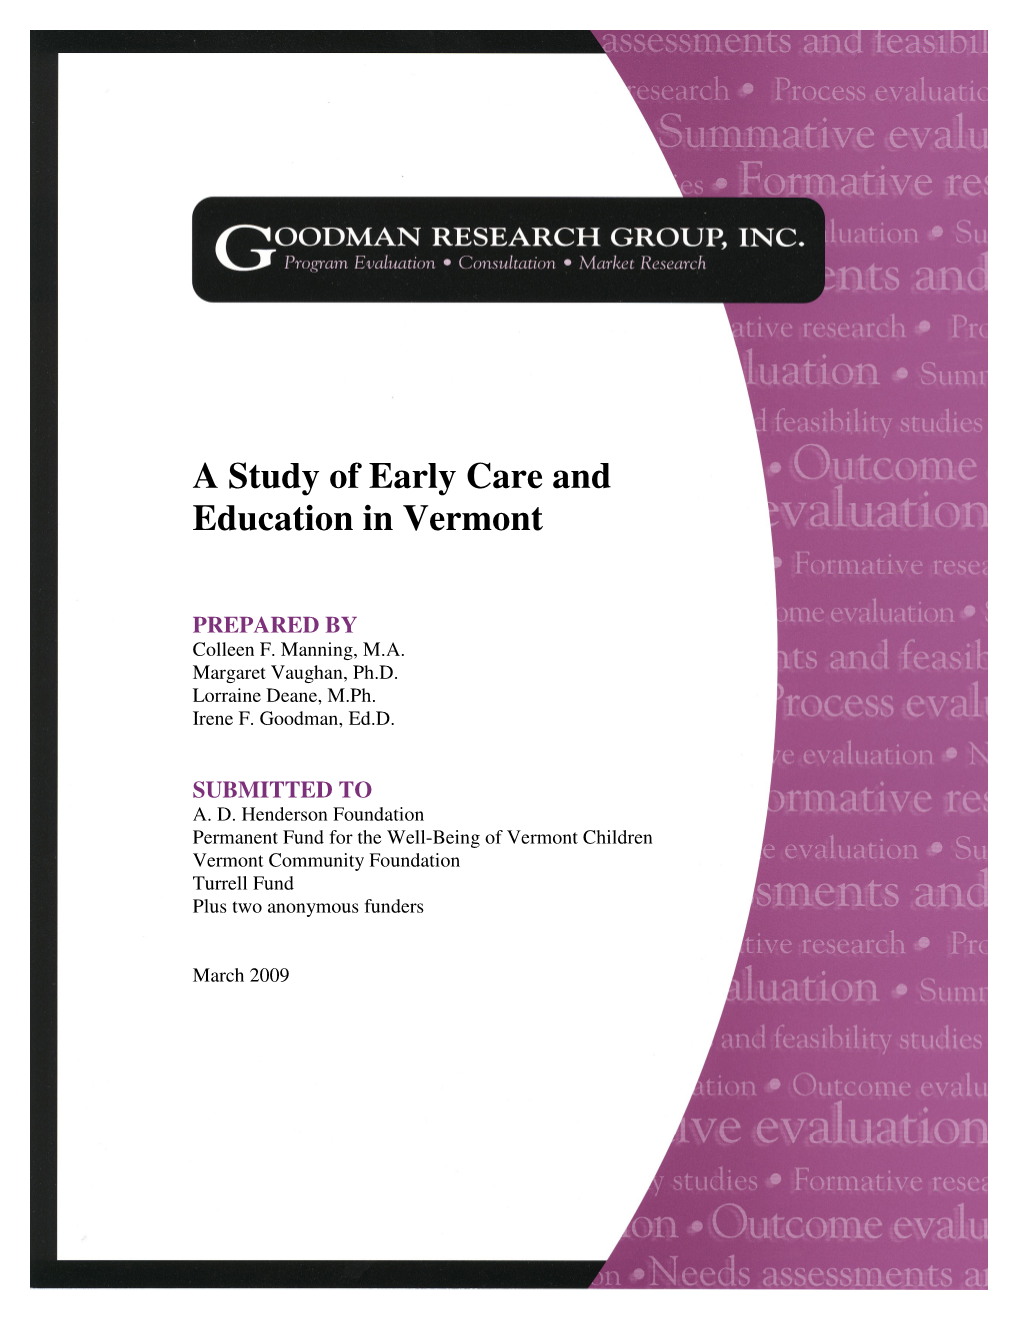 A Study of Early Care and Education in Vermont